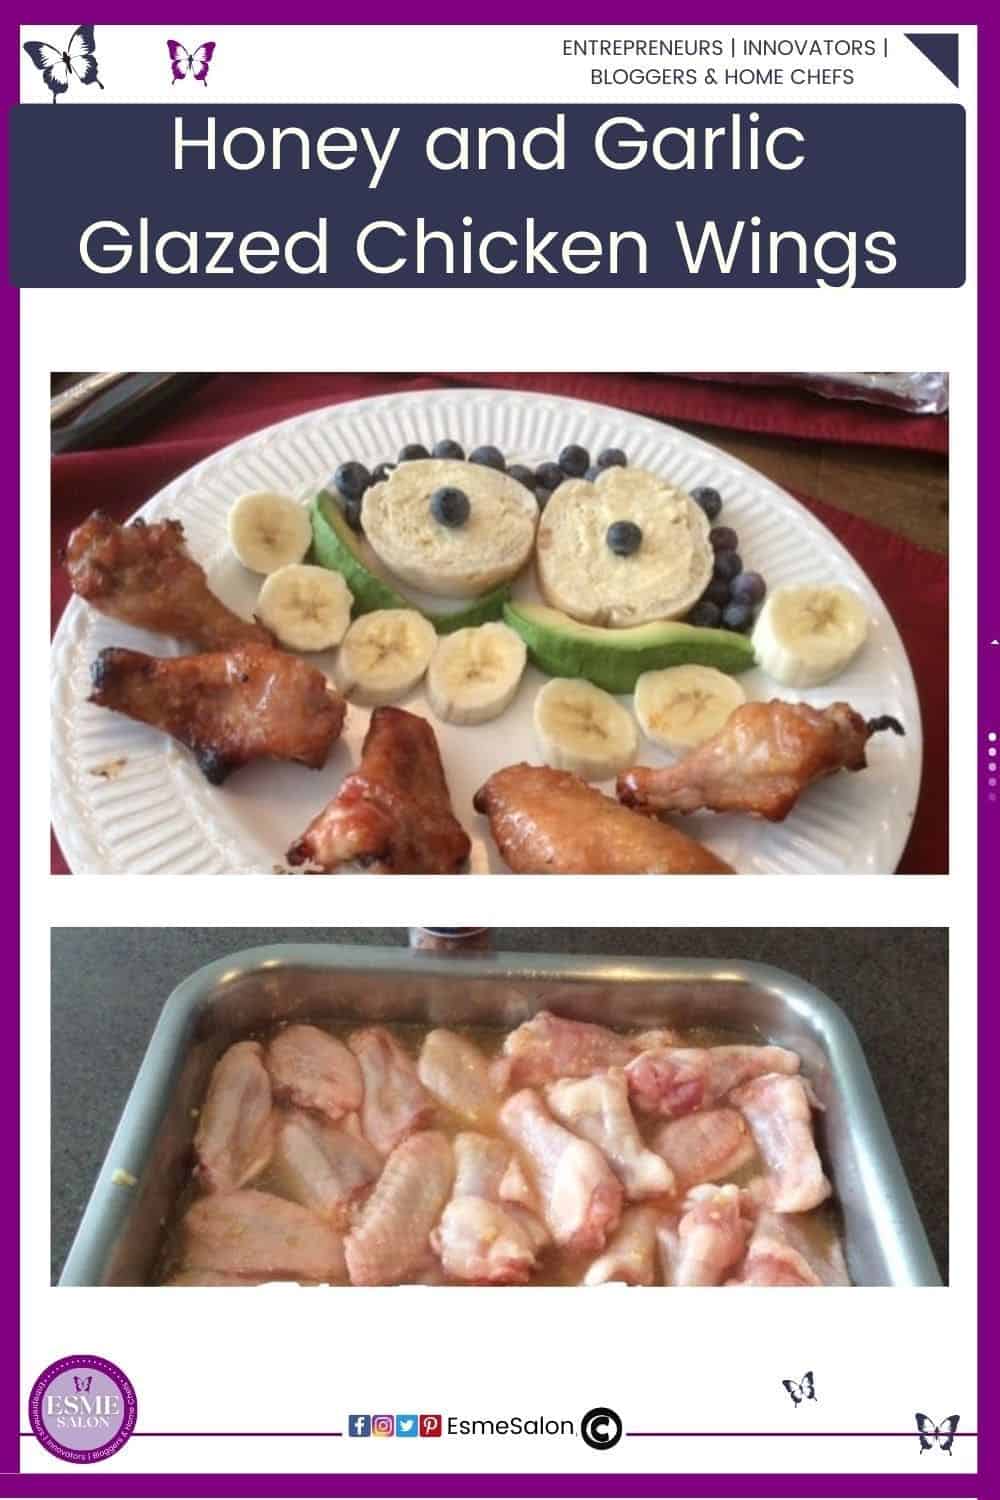 an image of a white dinner plate with 5 Honey and Garlic Glazed Chicken Wings, a buttered bun and some banana slices, avo slices and blue berries